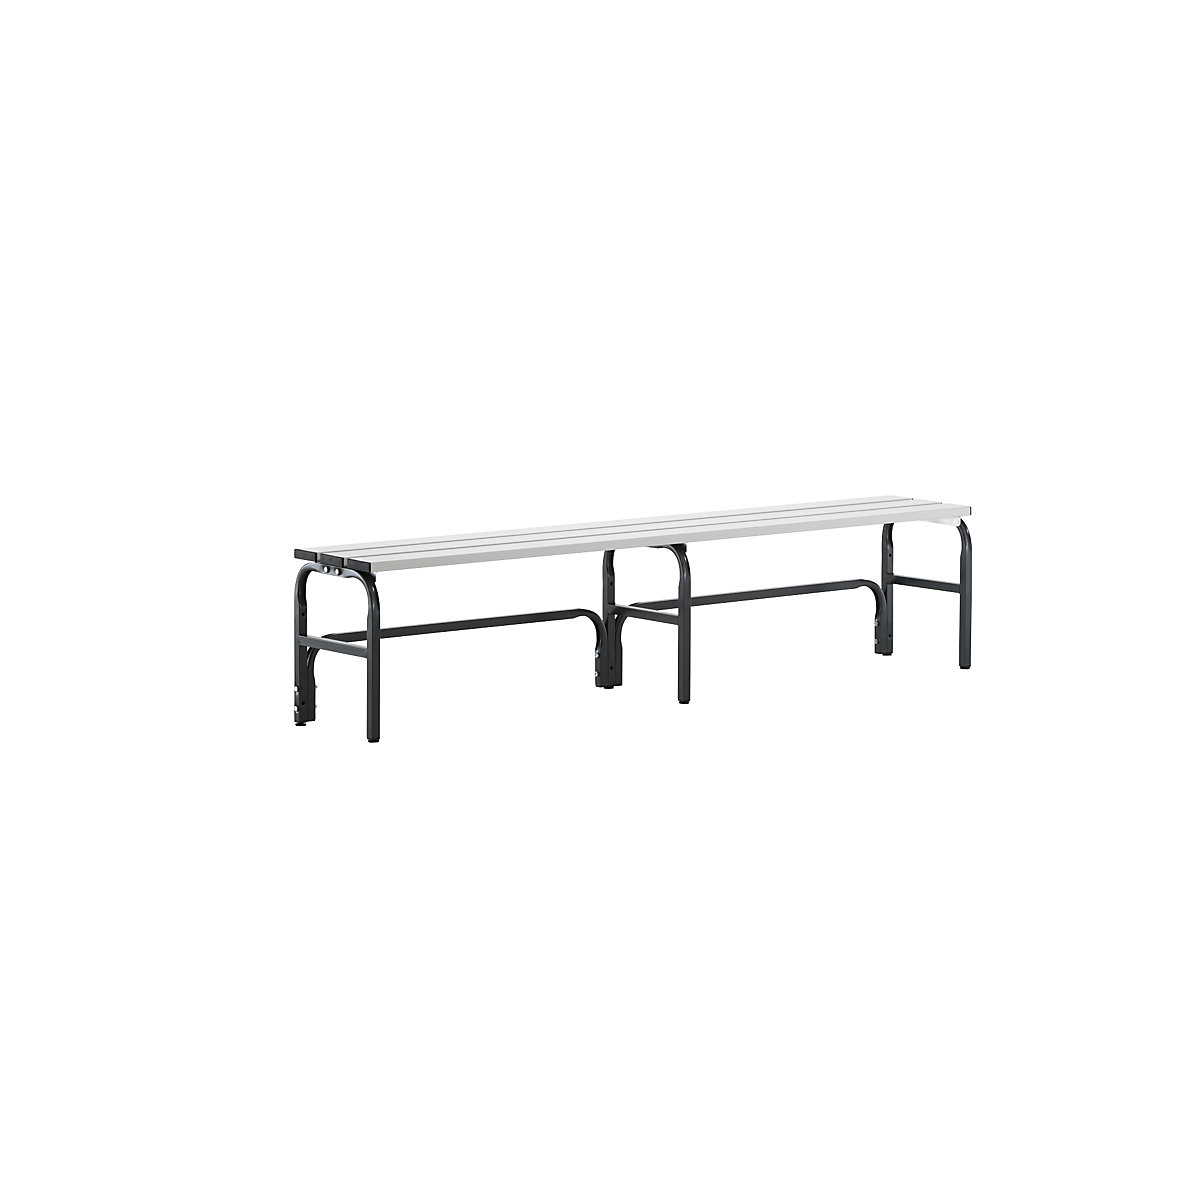 Sypro – Changing room bench made of stainless steel, HxD 450 x 350 mm, length 1500 mm, charcoal